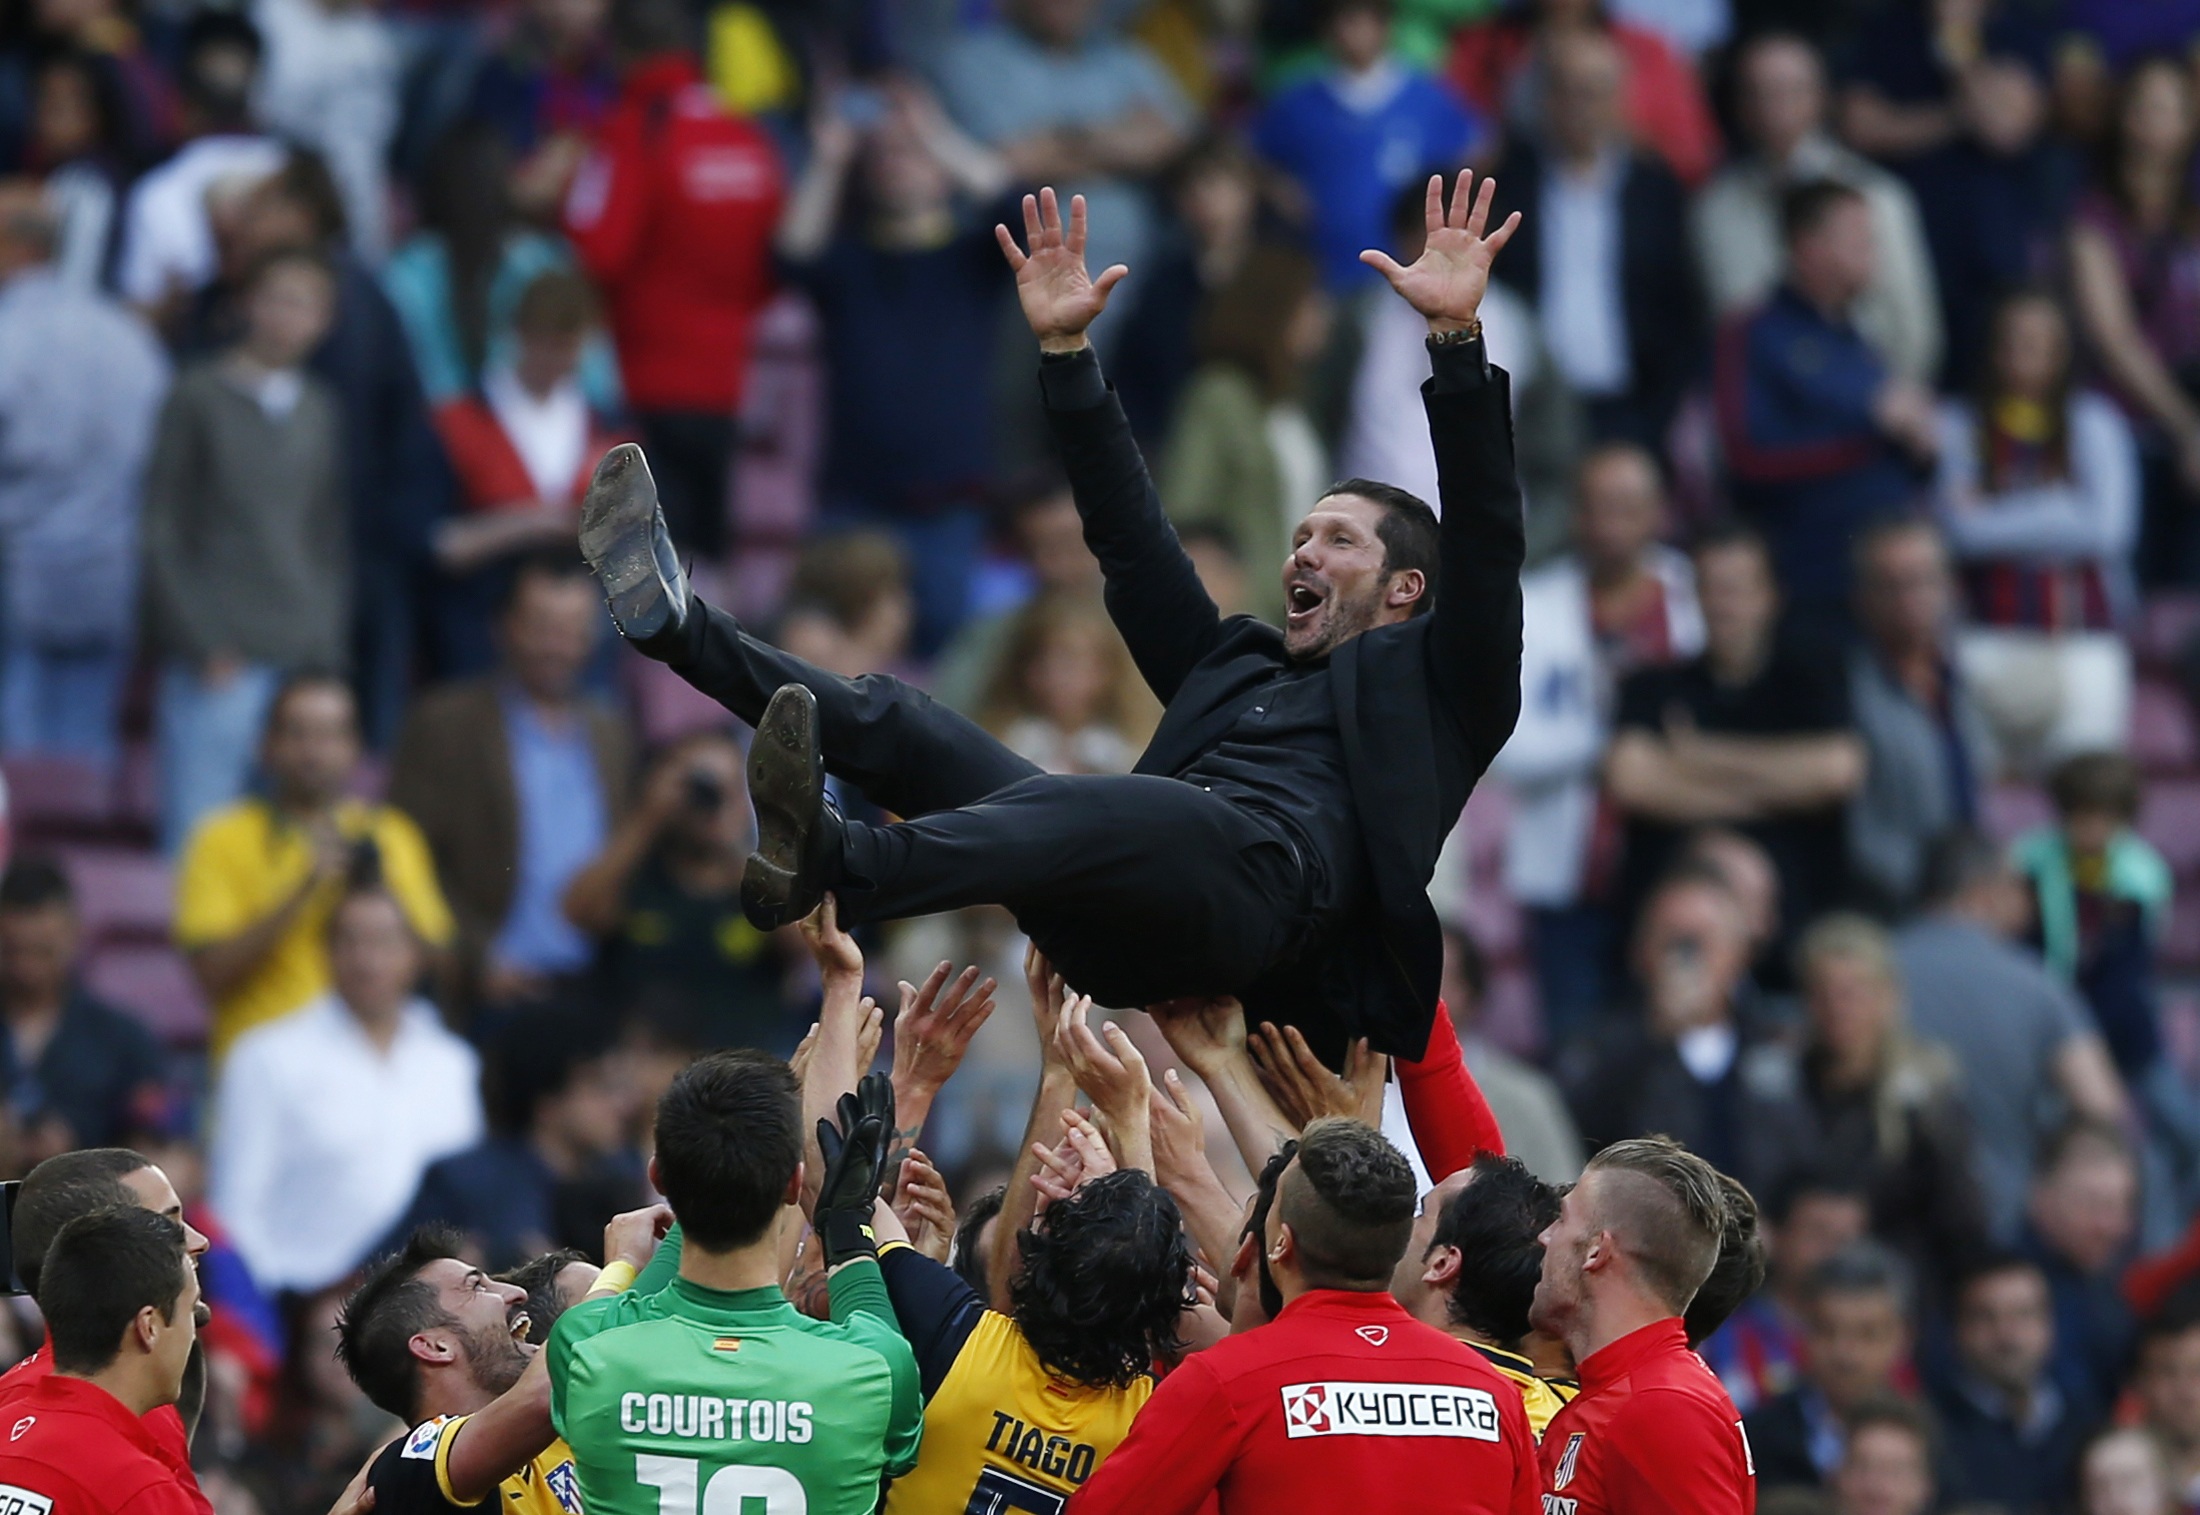 Atletico Madrid's coach Diego Simeone celebrates with players after winning the Spanish first division title following their soccer match against Barcelona at Camp Nou stadium in Barcelona May 17, 2014. REUTERS/Marcelo del Pozo (SPAIN - Tags: SPORT SOCCER